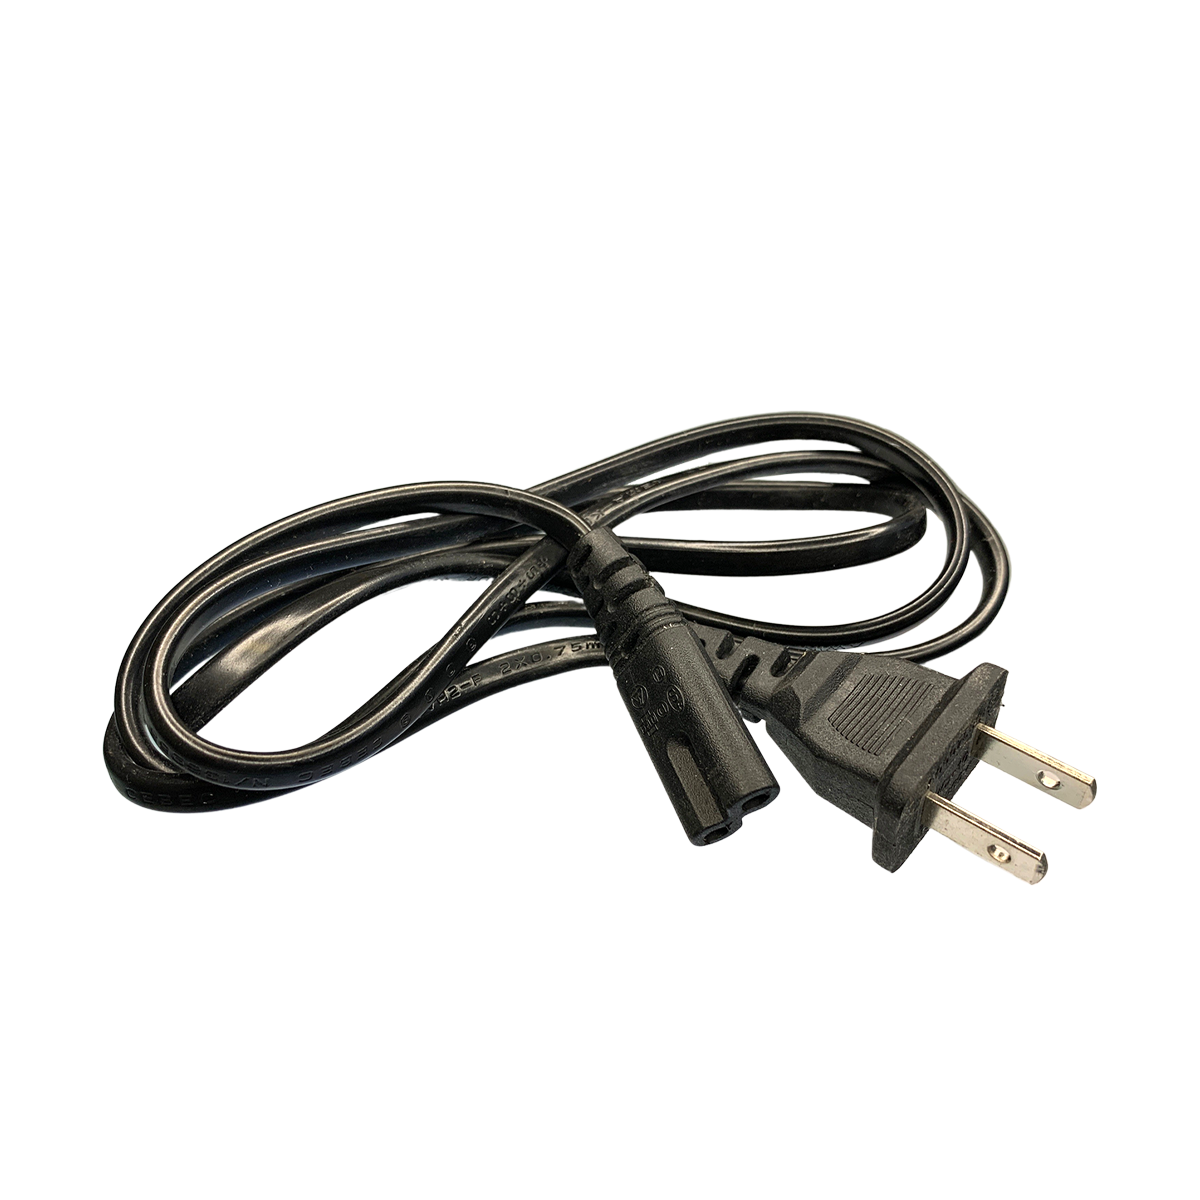 Sony PlayStation 5 PS5 AC Power Cable Cord